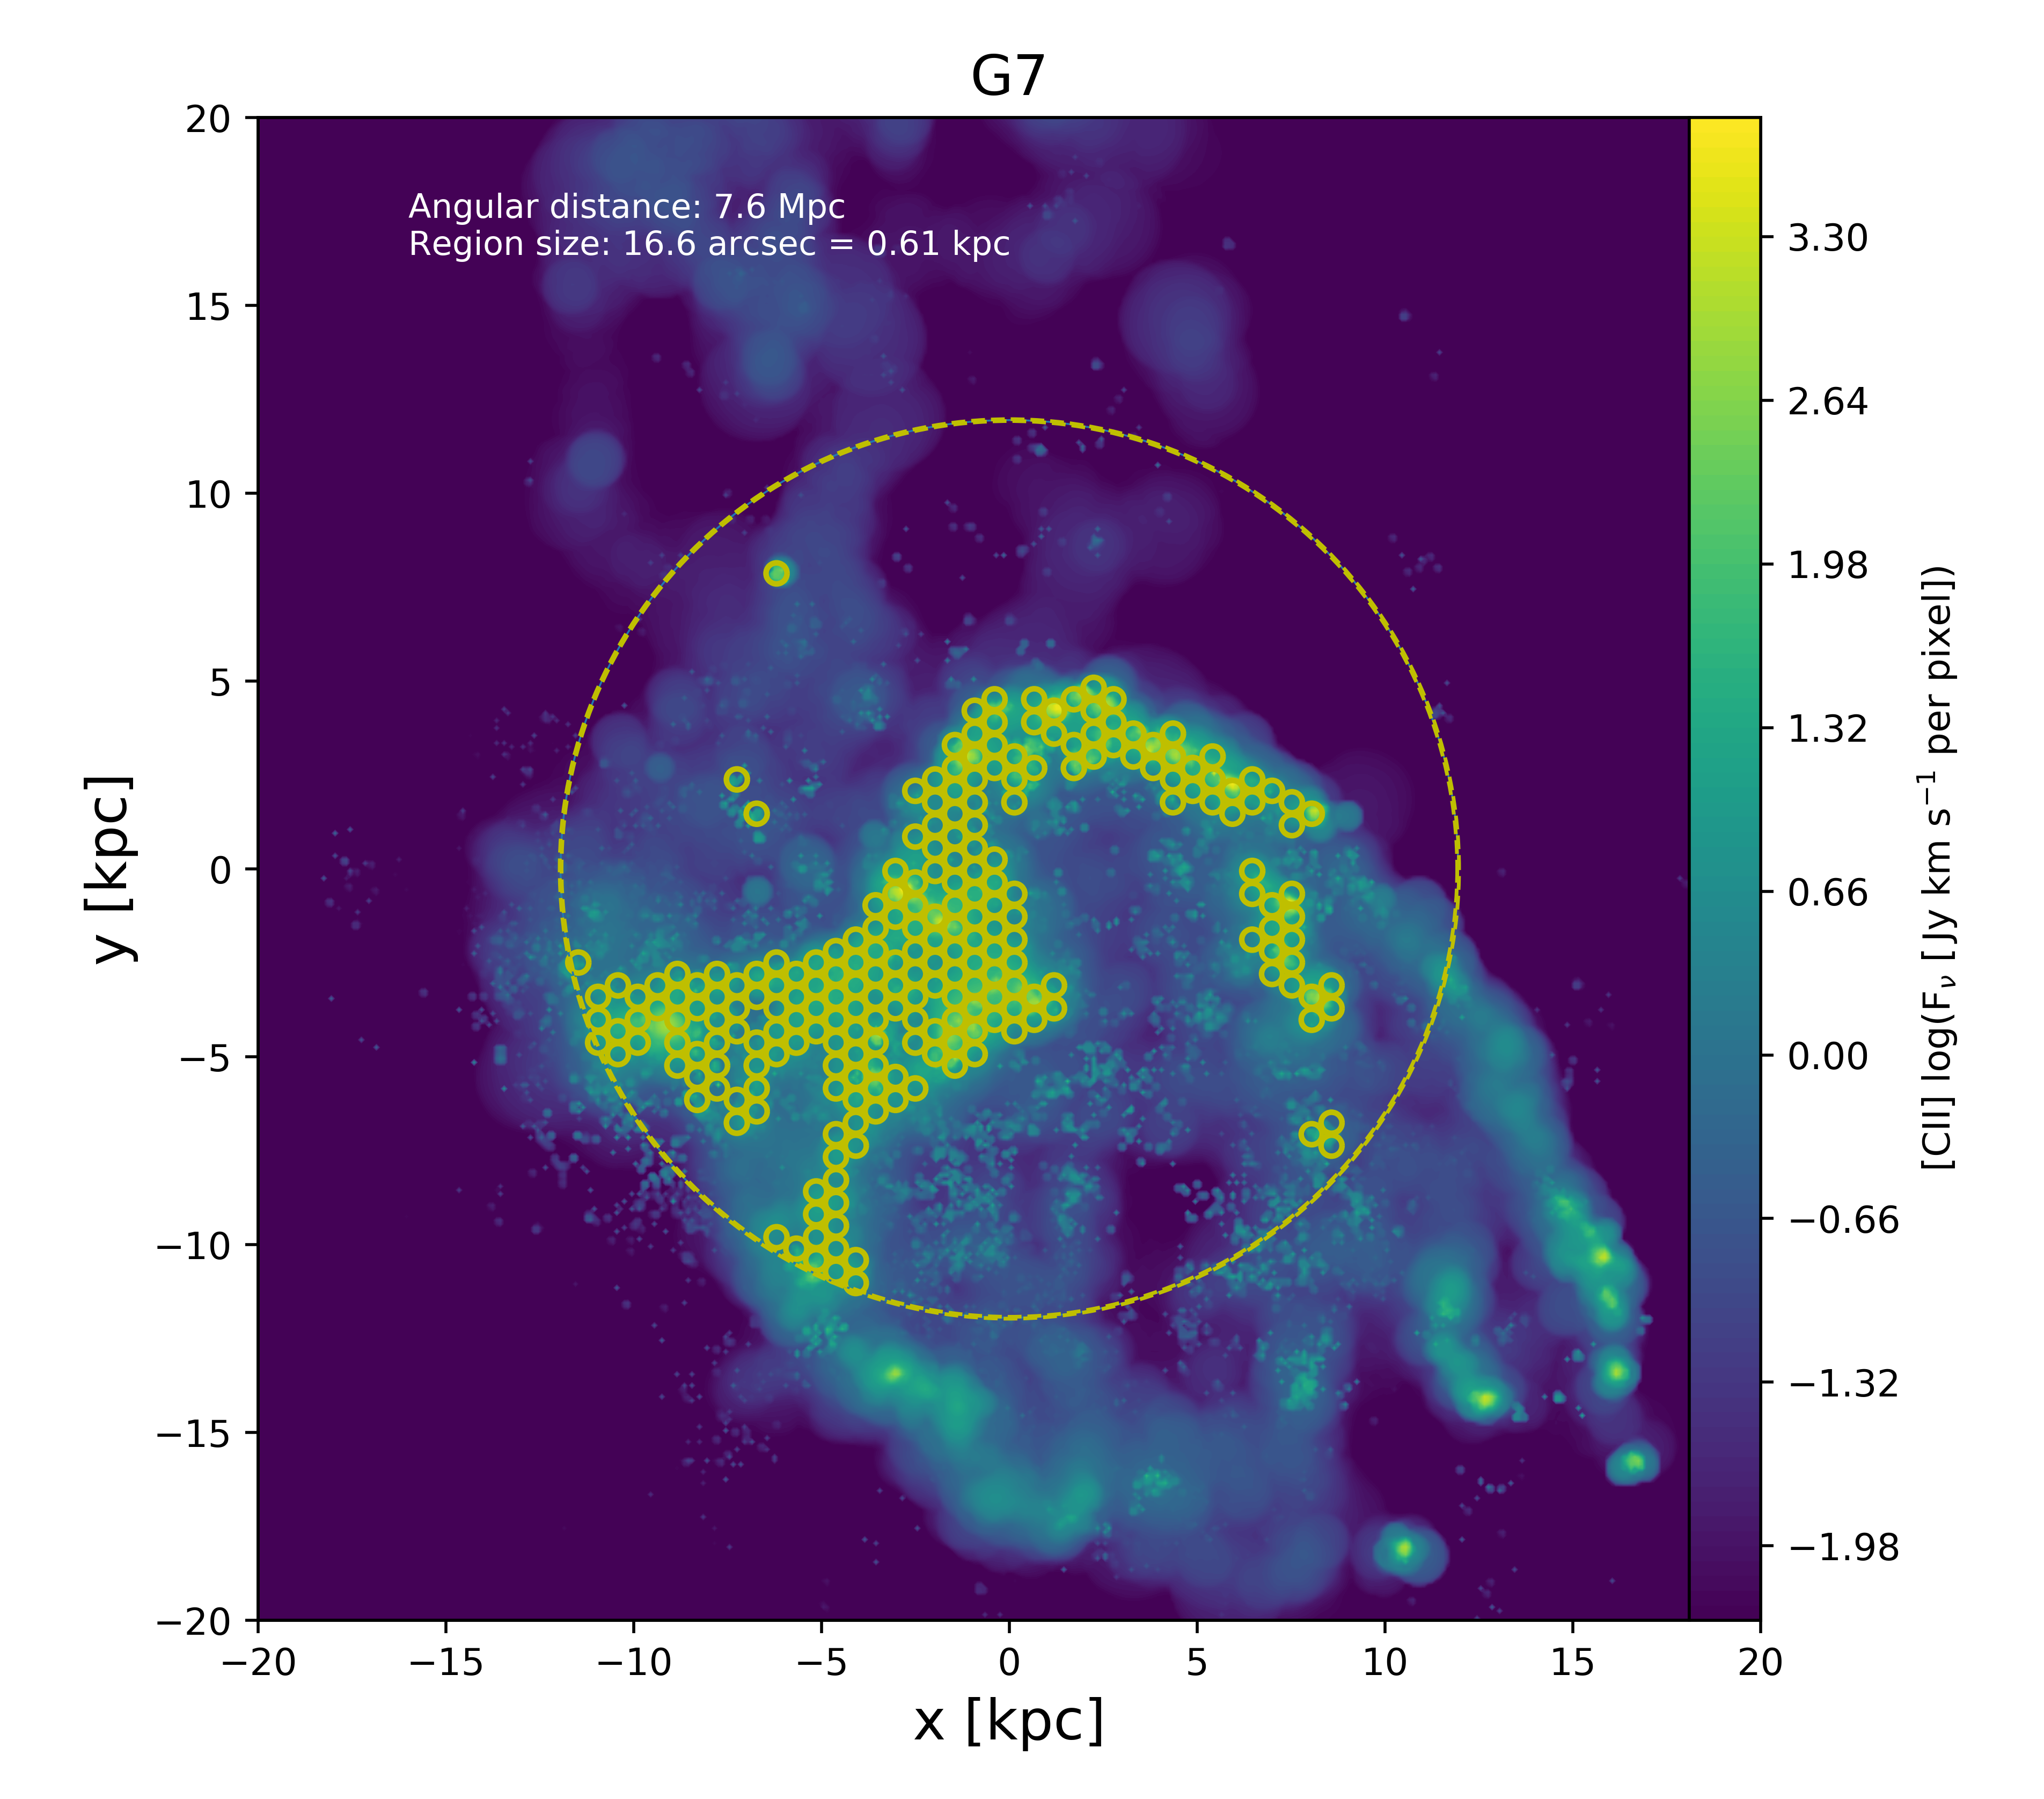 [CII] moment0 map at z~0 with Herschel resolved resolved areas overlaid on top.